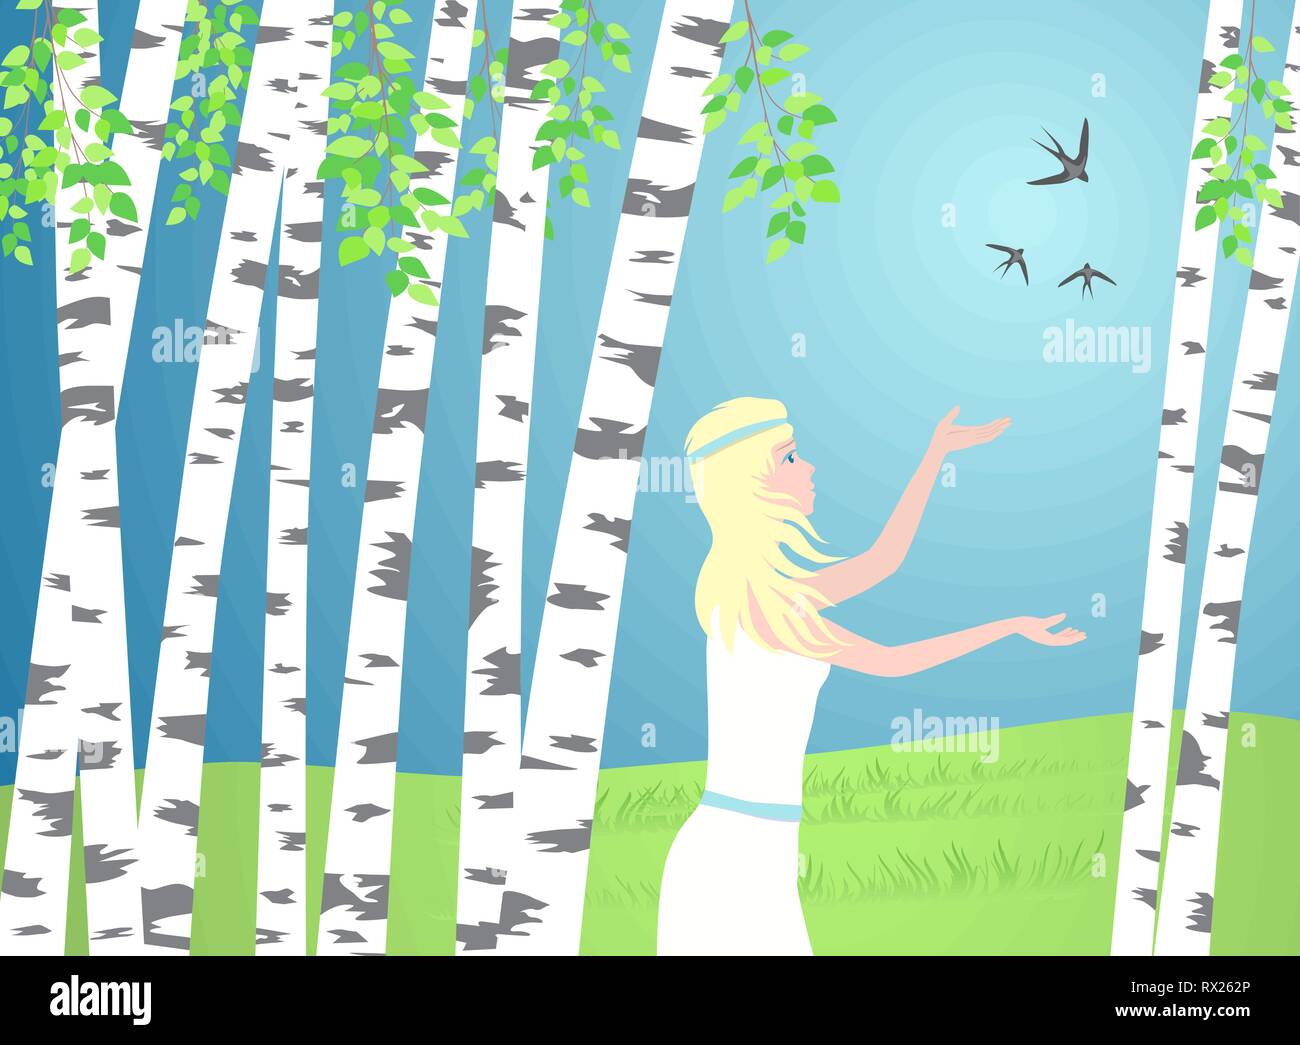 Girl walks between the birches. Birds fly over woman hands. Green lawn and birch branches. Vector illustration EPS-8. Stock Vector